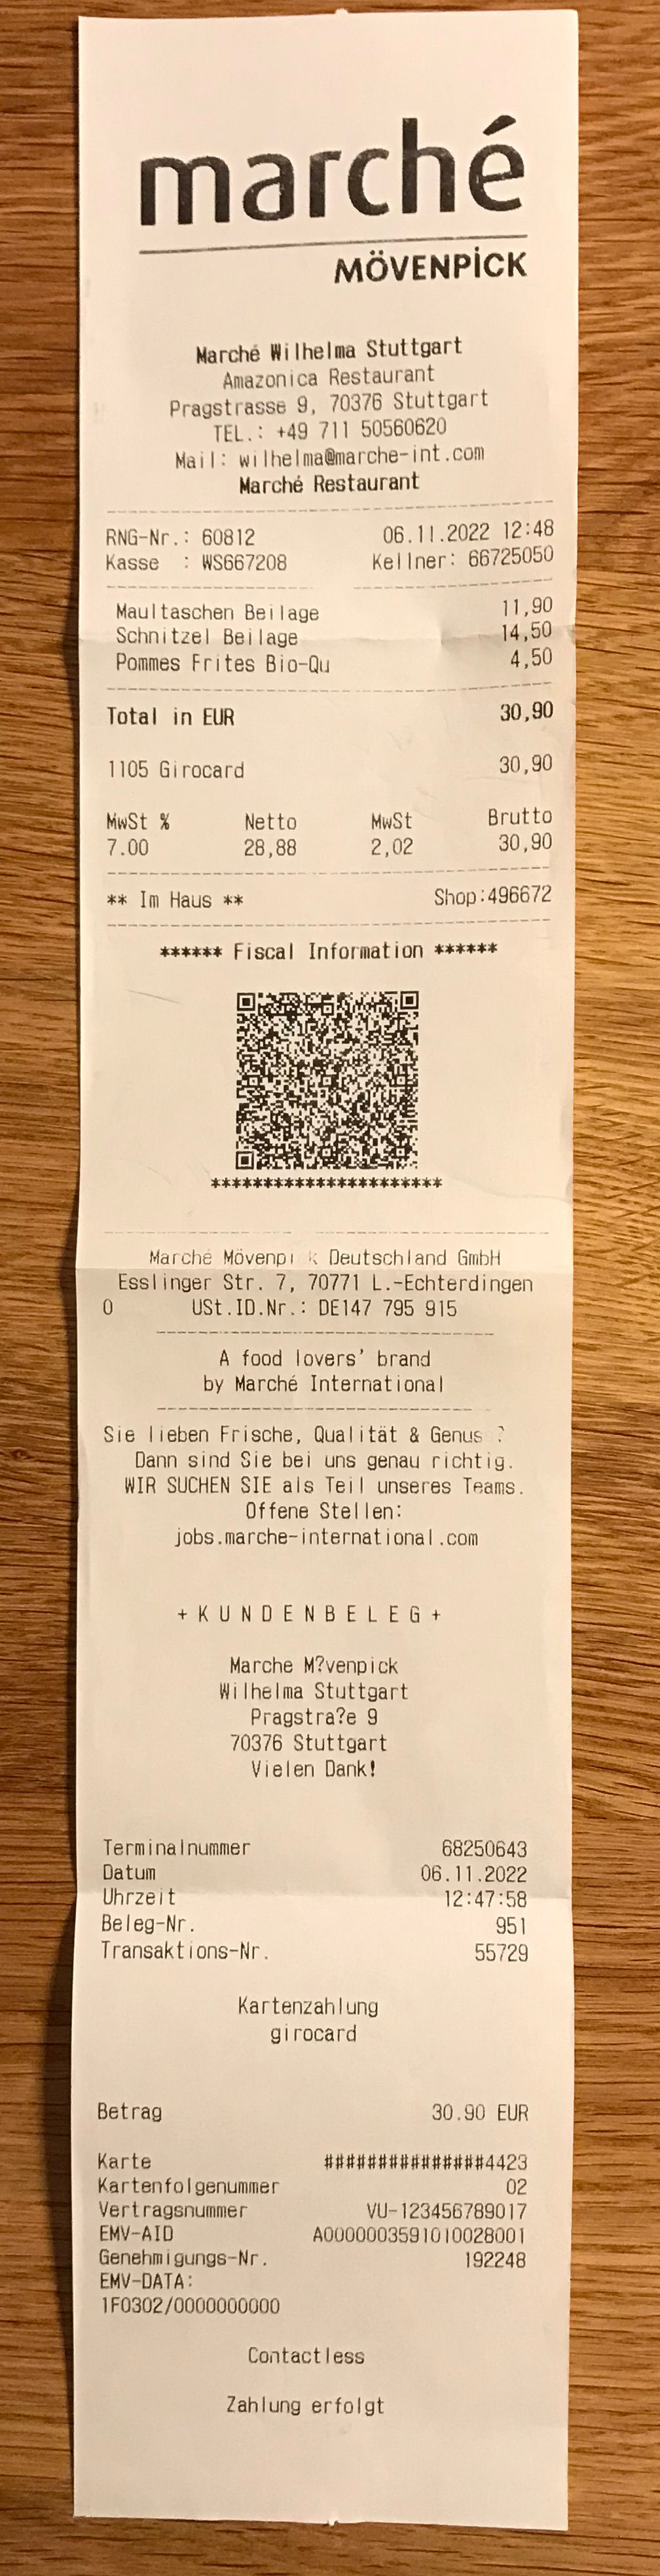 Preview image of a receipt